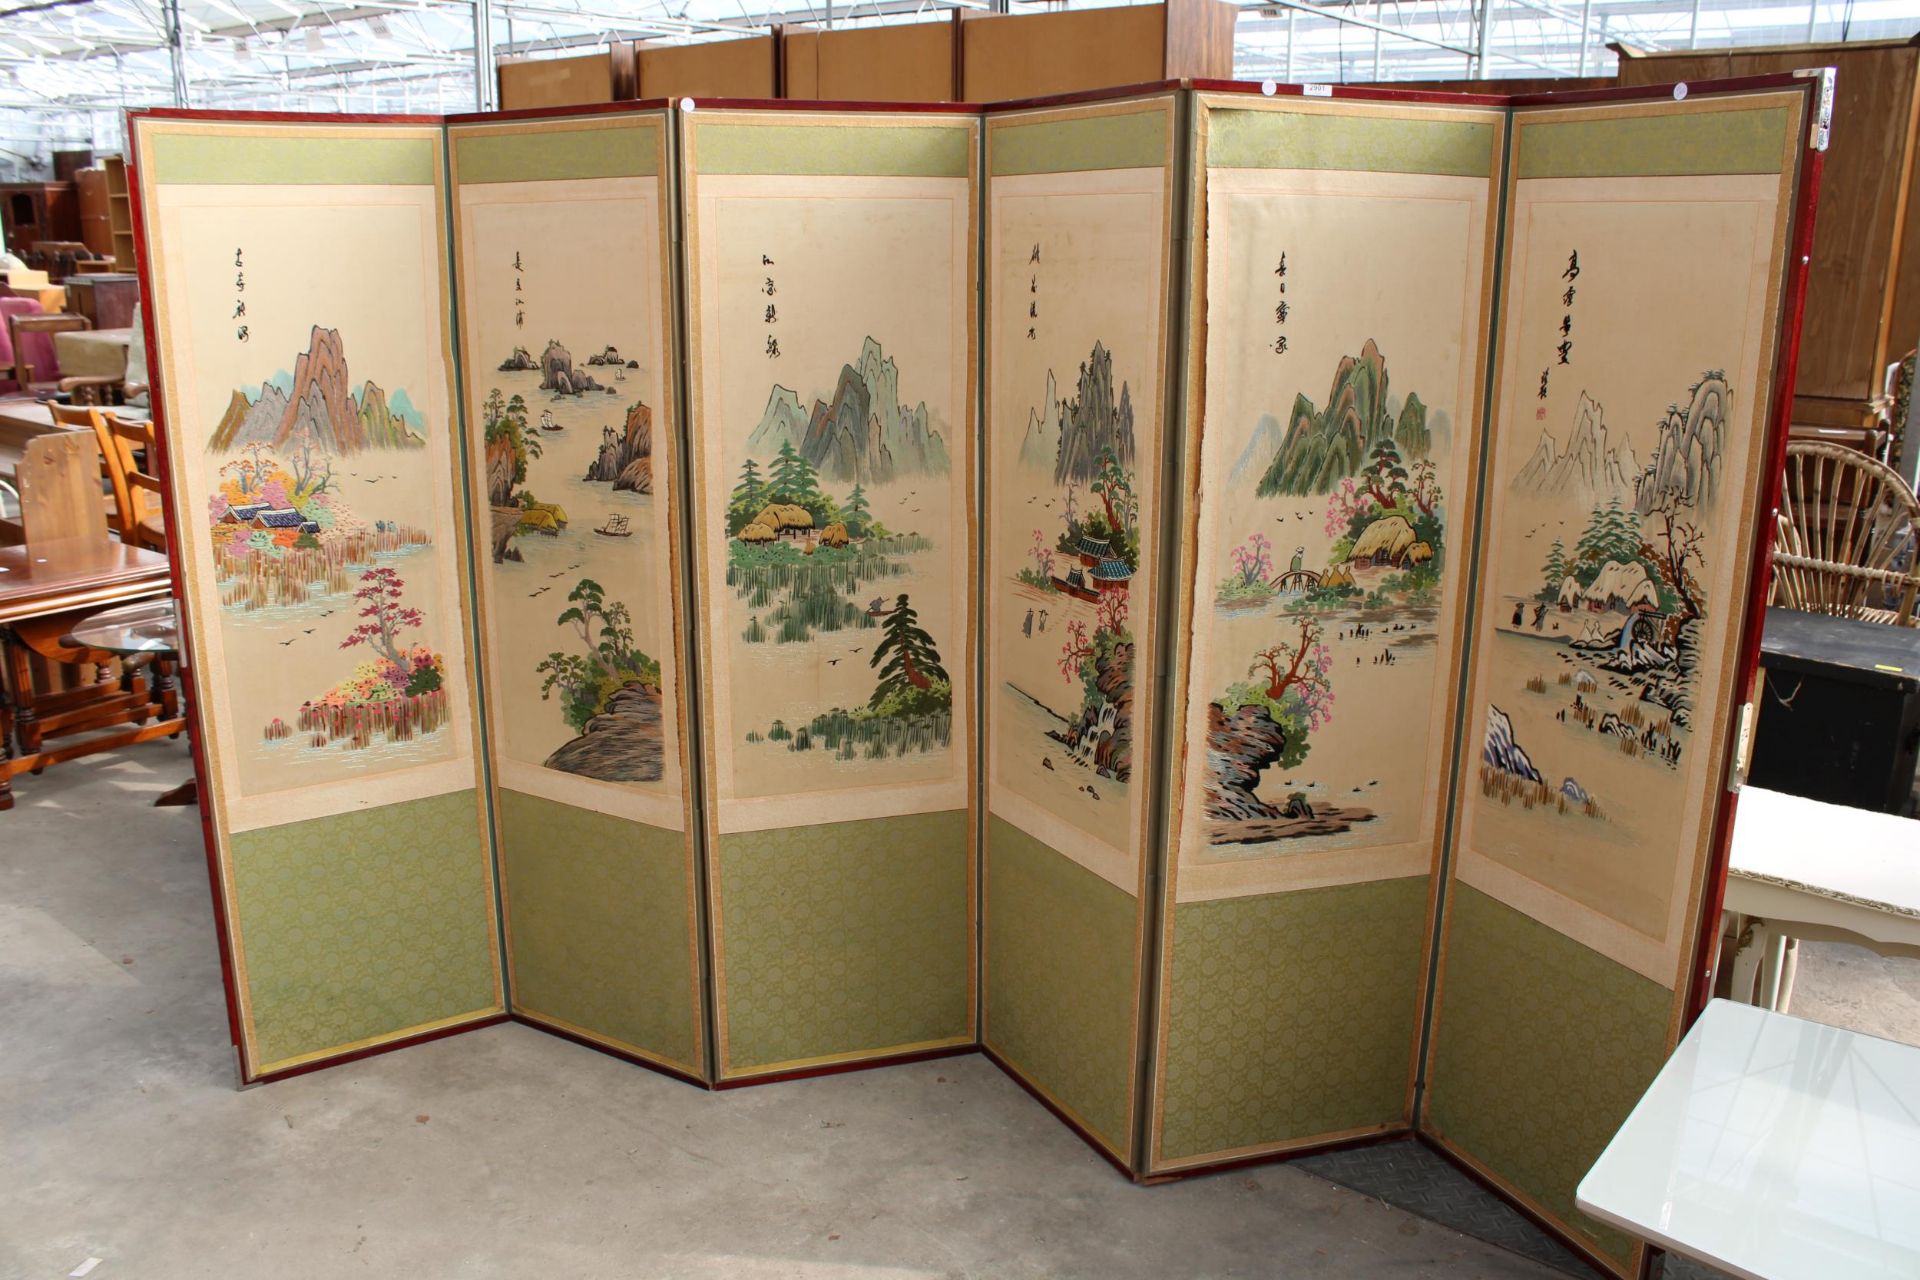 AN ORIENTAL SIX DIVISION SCREEN WITH TAPESTRY AND SILK MOUNTAIN SCENES EACH SECTION IS 60" X 18"